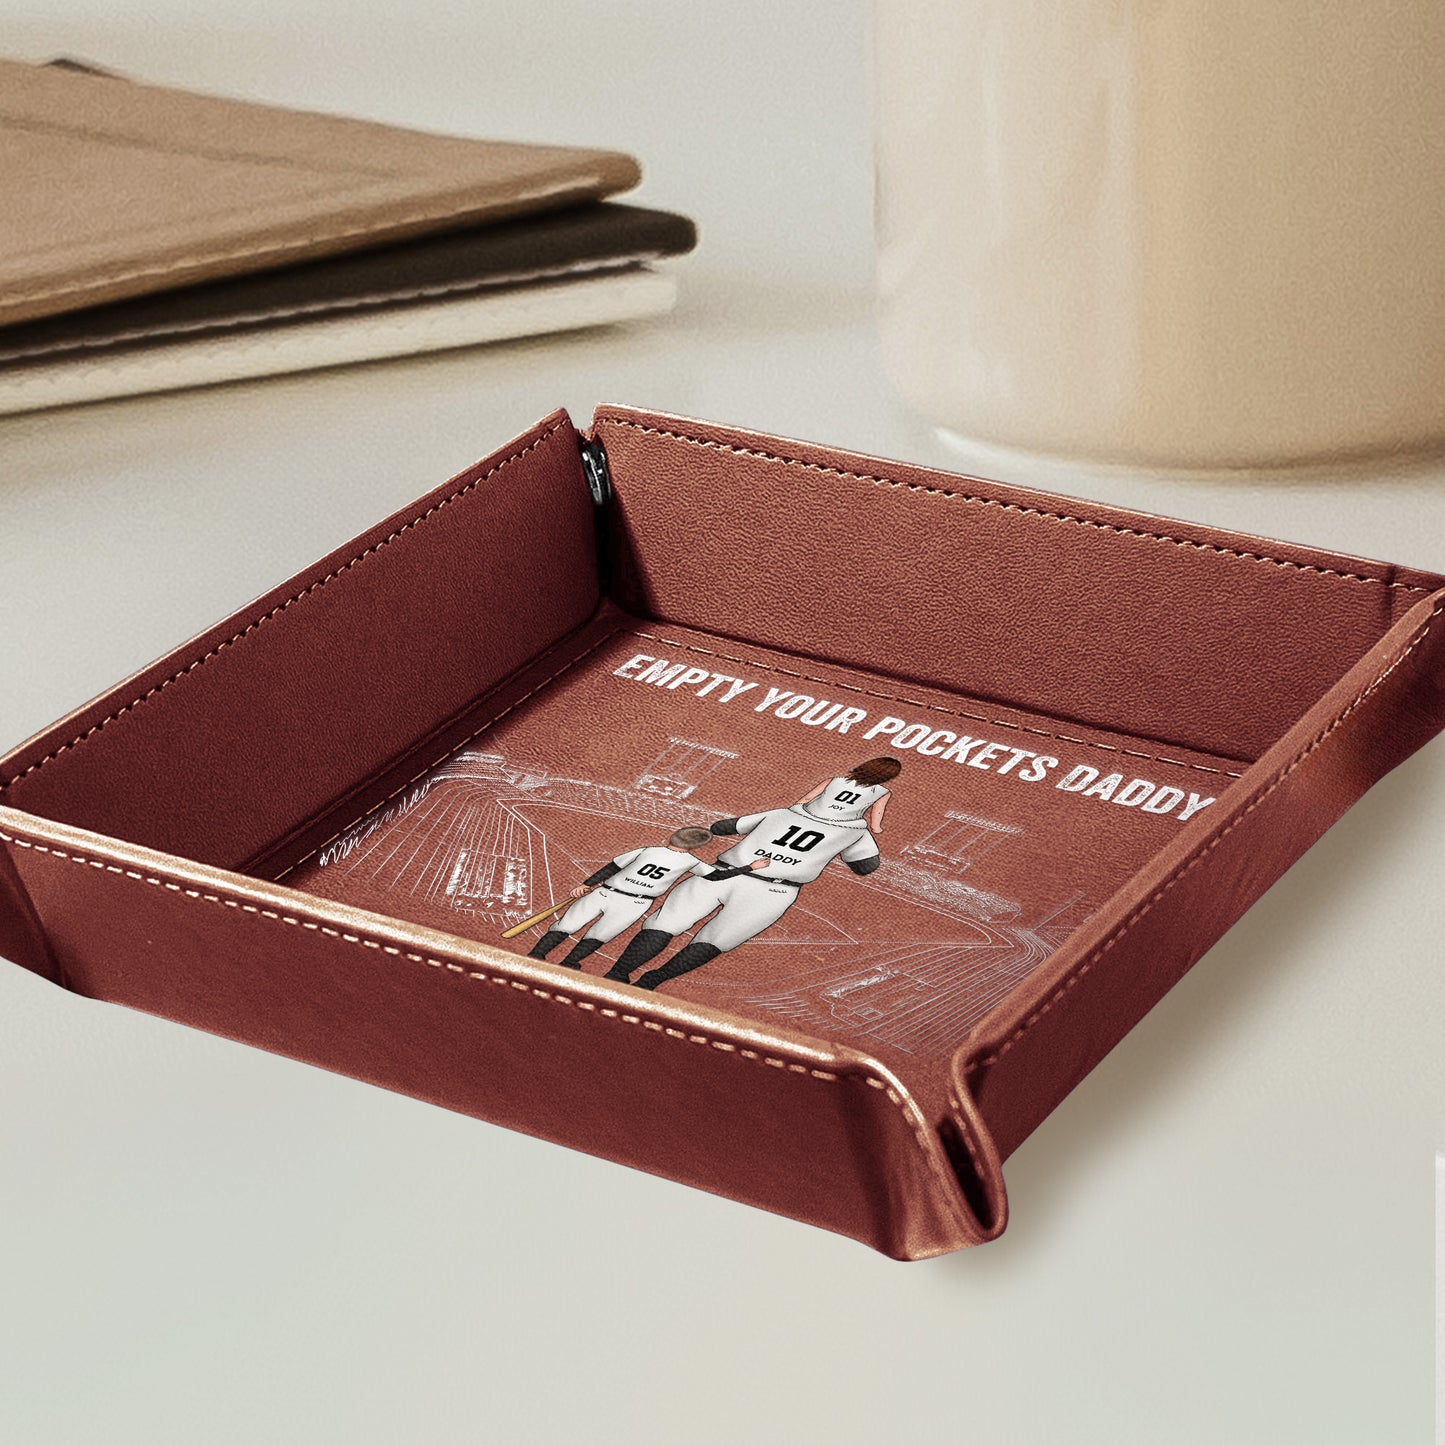 We Can't Wait To Play Baseball With You - Personalized Leather Valet Tray